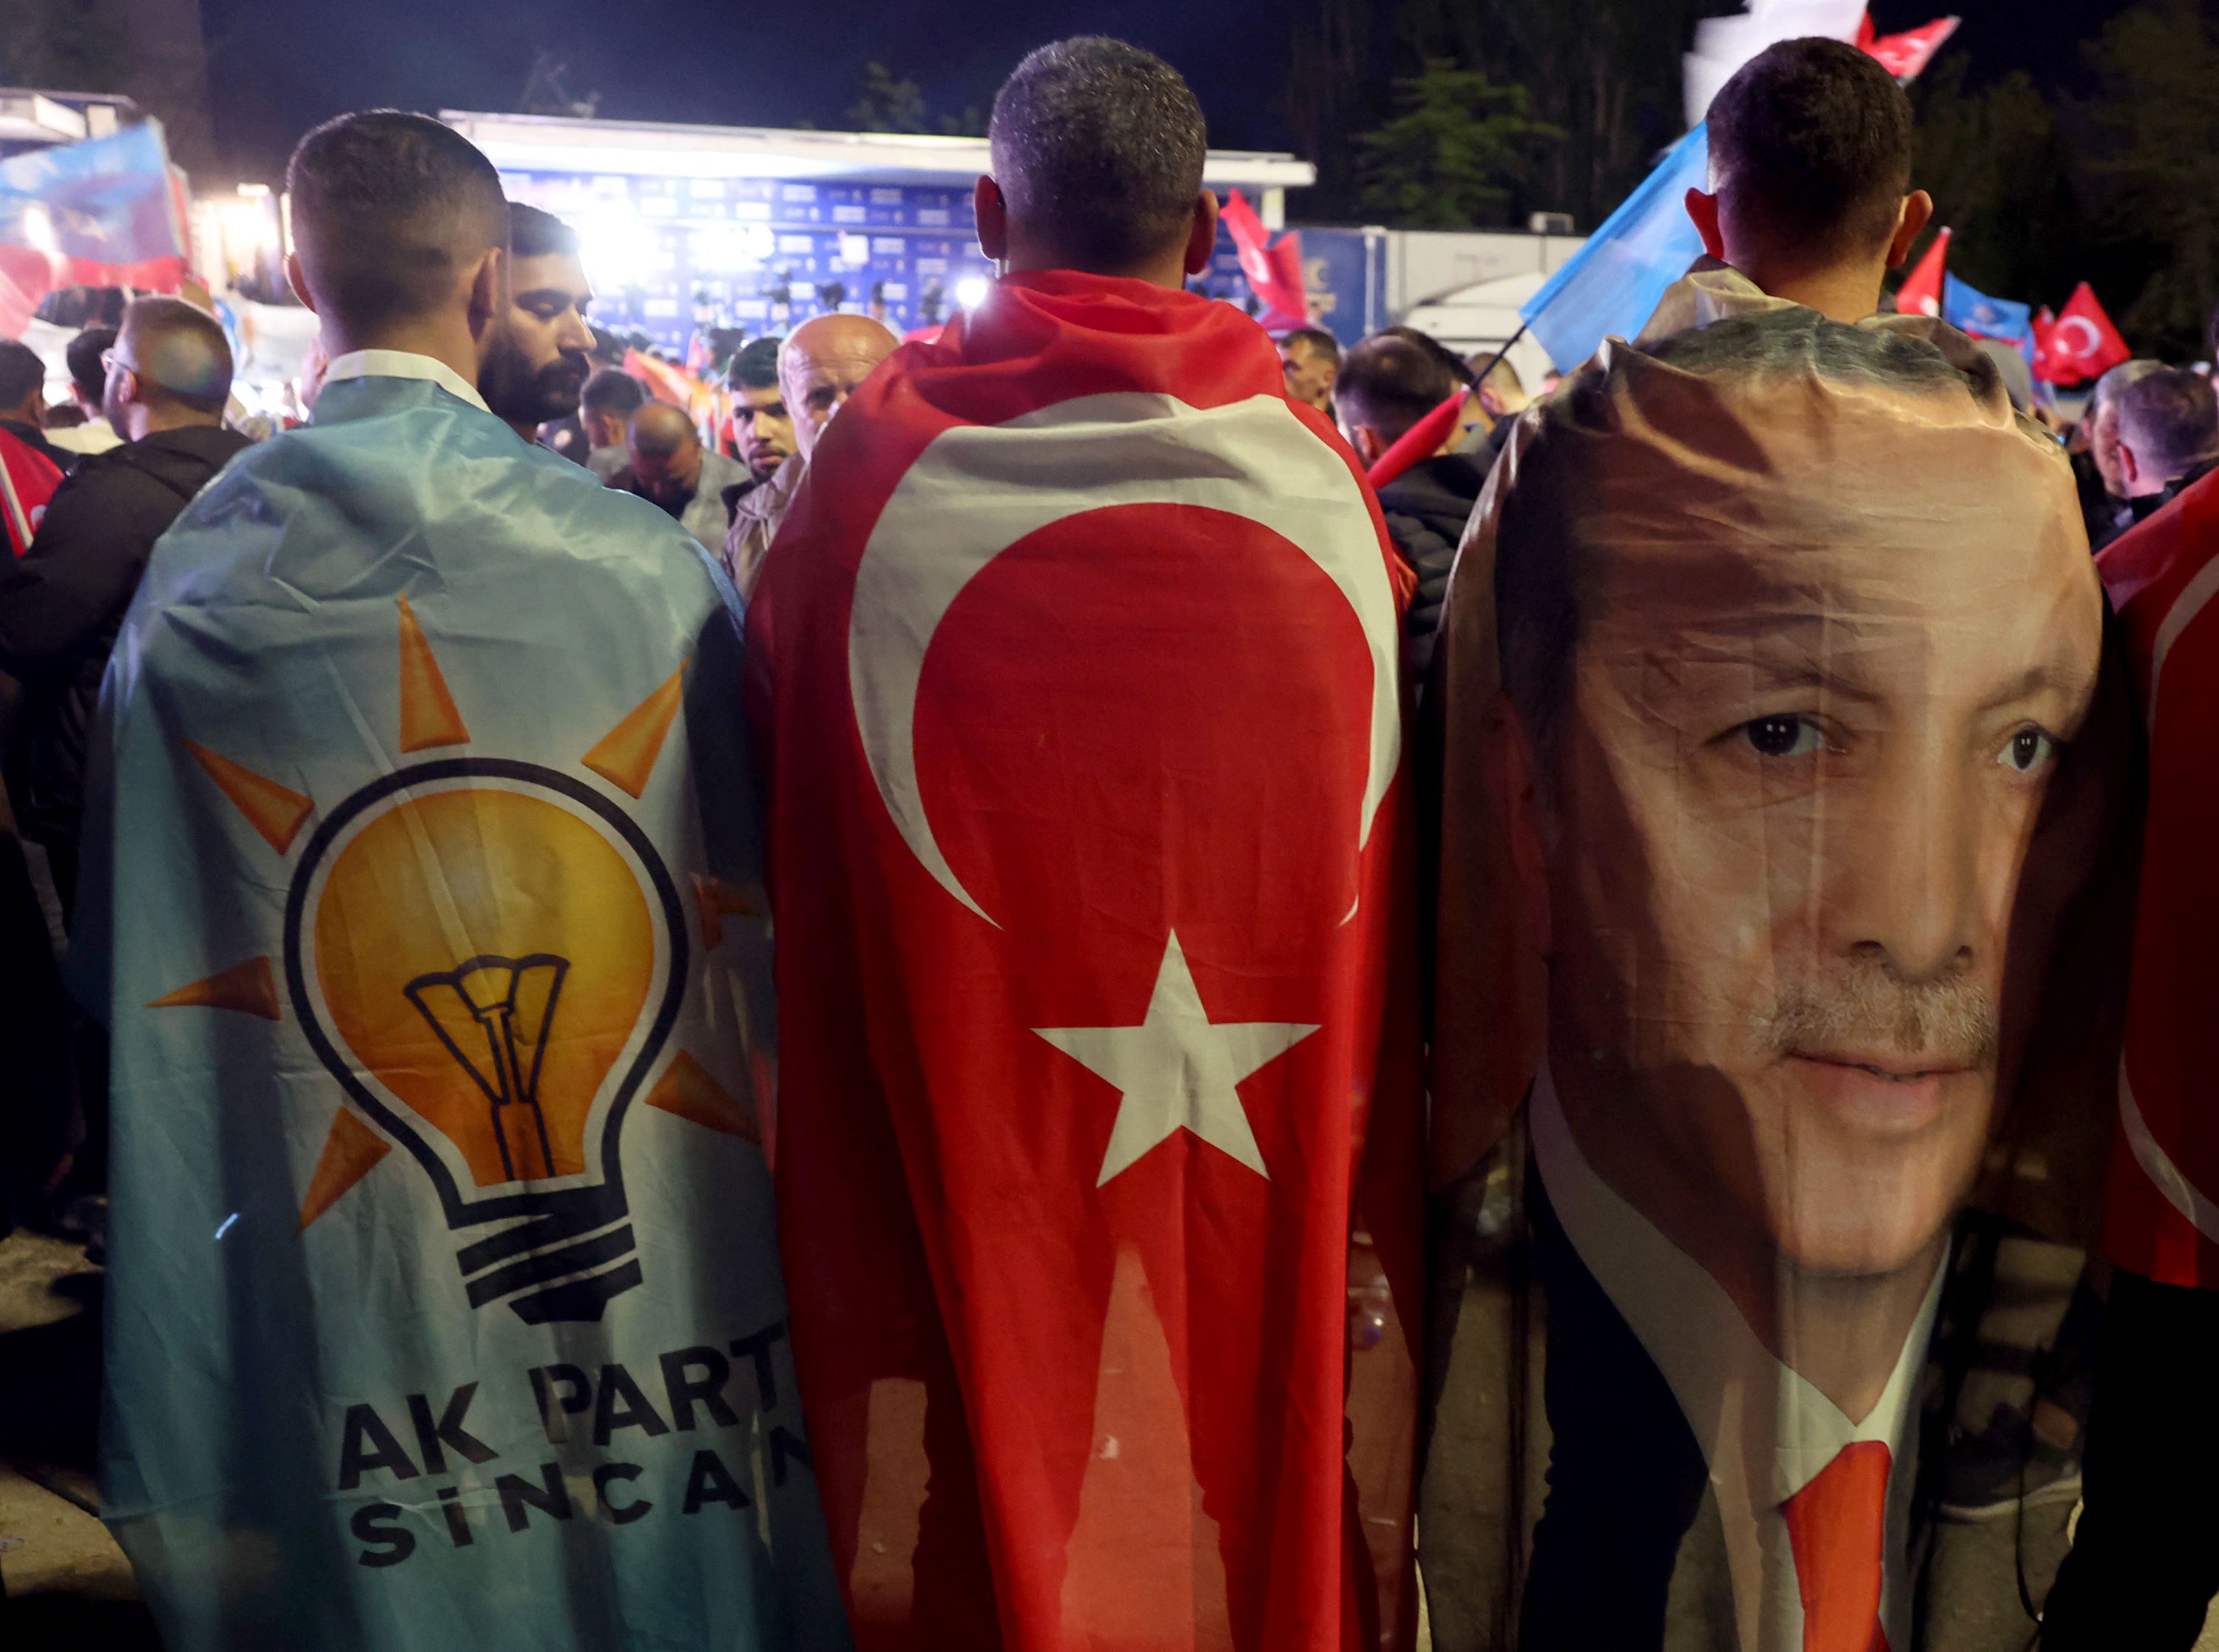 Supporters drapped in the flags of the AK Party, Turkish Flag and image of Turkish President Tayyip Erdogan stand outside the AK Party headquarters after polls closed in Turkey (AFP)